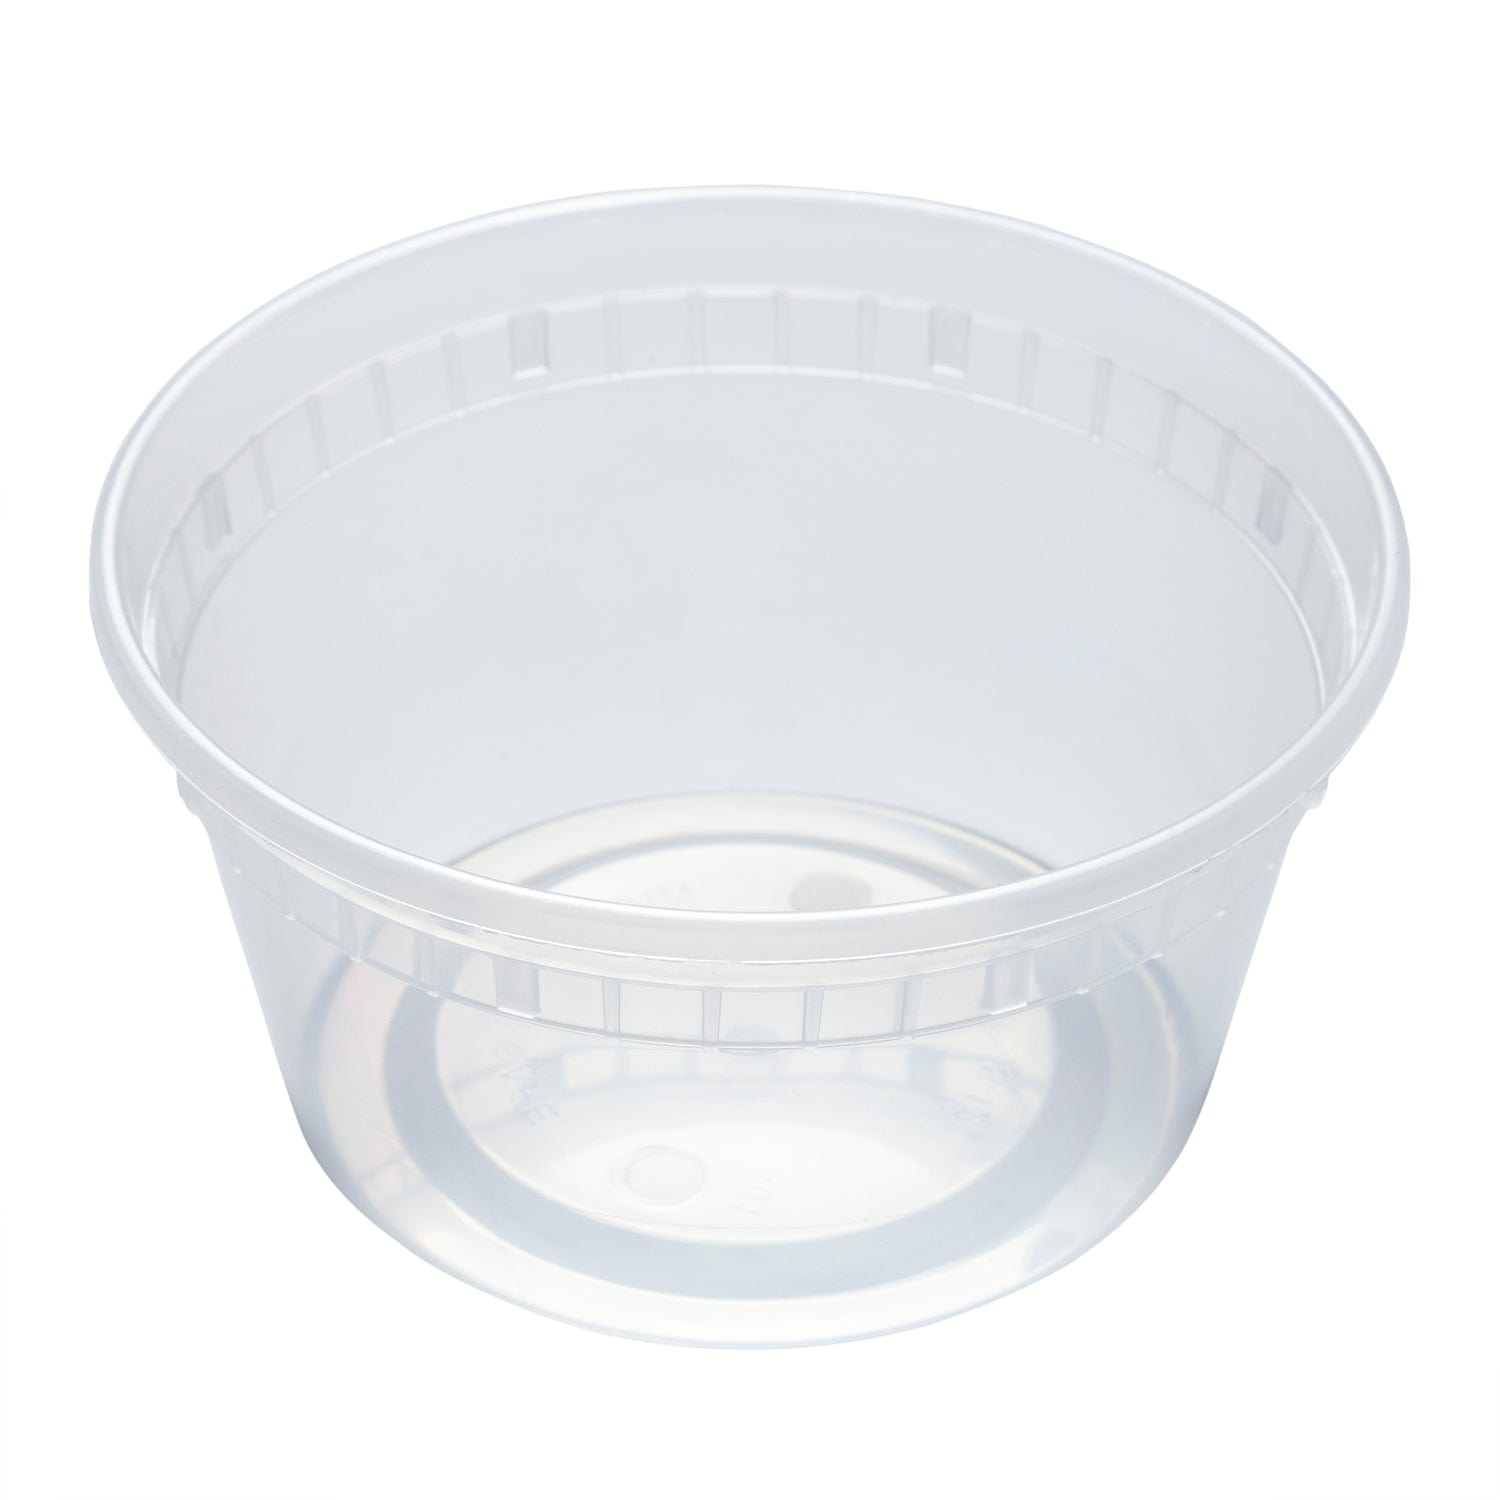 Pantry Value 12 Oz Deli Containers with Lids Food Prep Containers